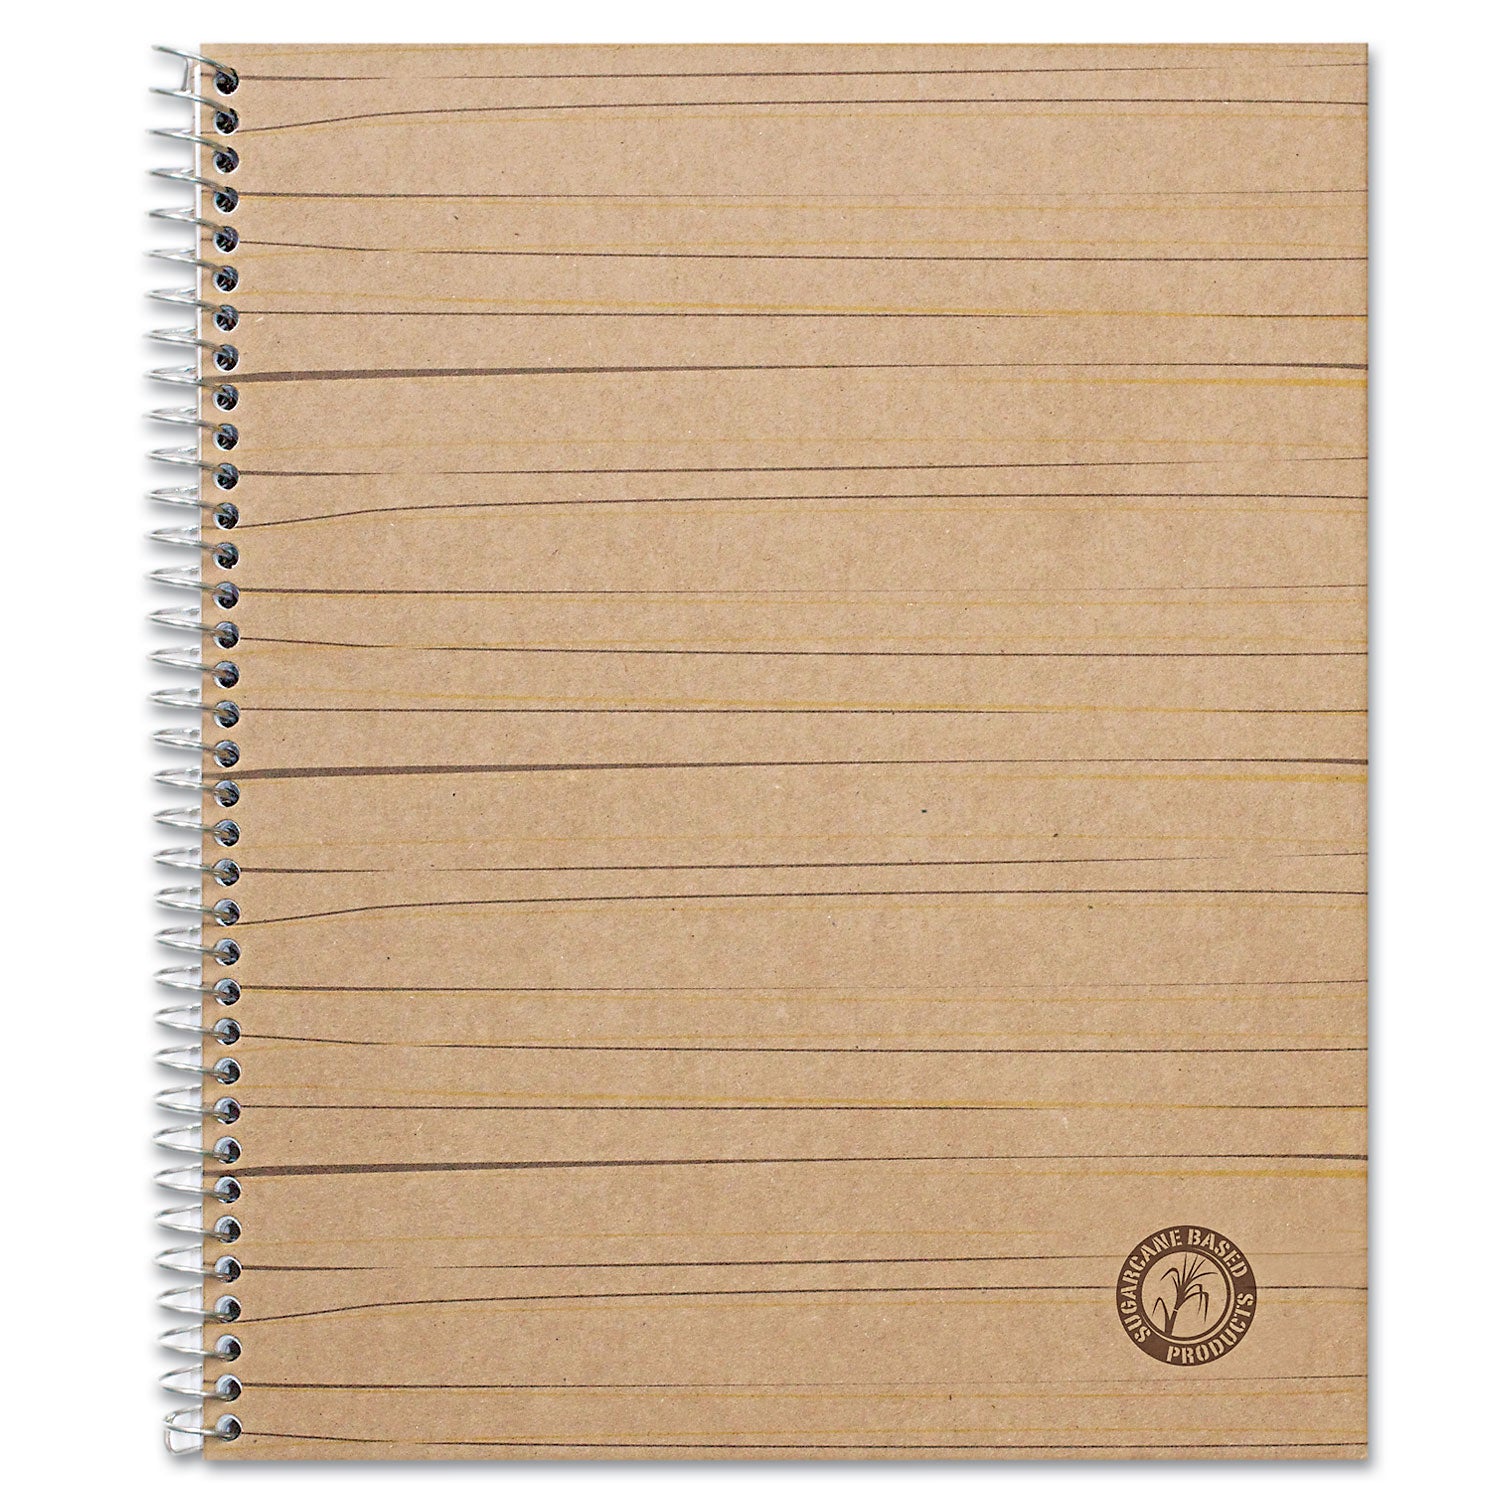 Deluxe Sugarcane Based Notebooks, Kraft Cover, 1-Subject, Medium/College Rule, Brown Cover, (100) 11 x 8.5 Sheets - 